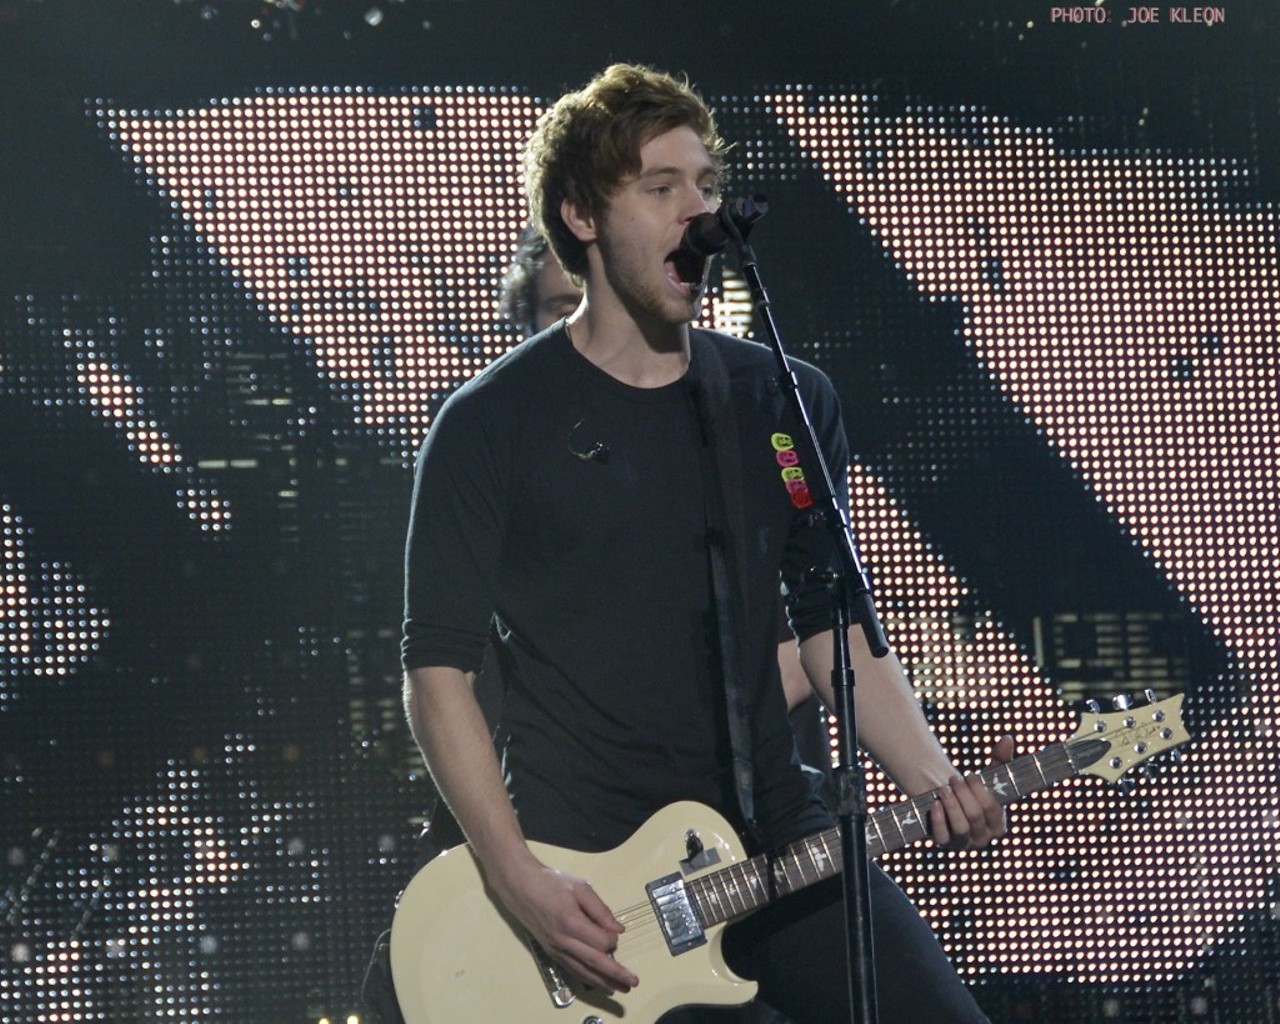 5 Seconds of Summer Performing at Quicken Loans Arena